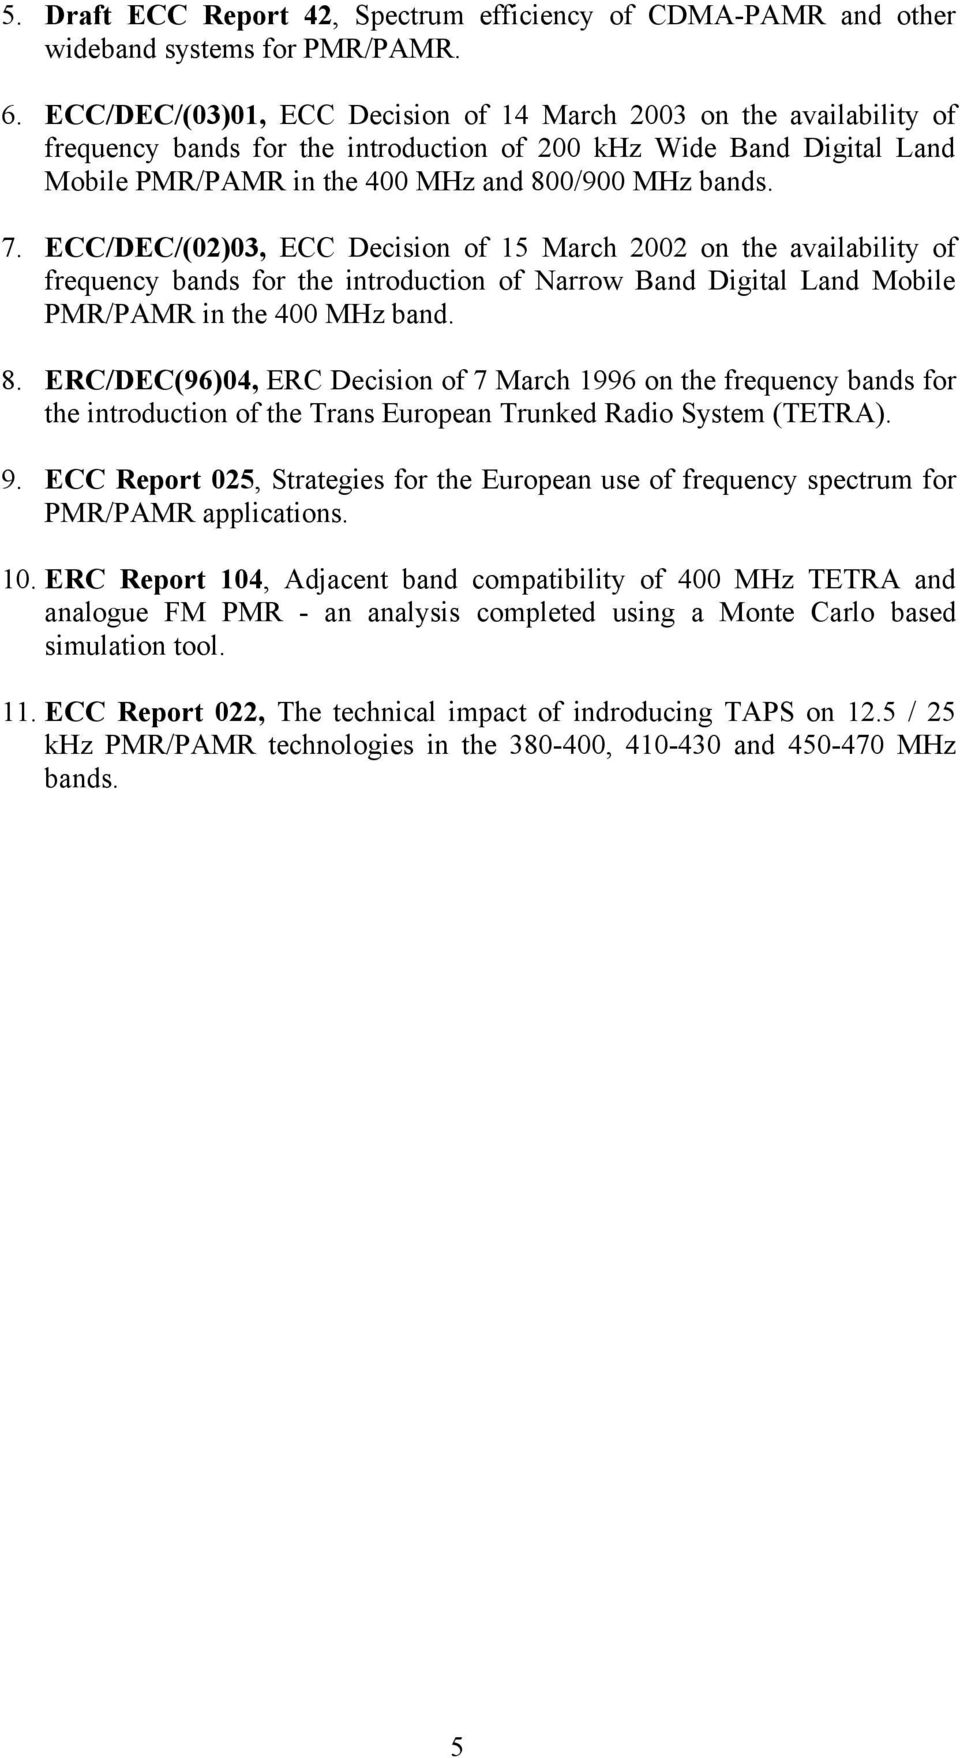 ECC/DEC/(02)03, ECC Decision of 15 March 2002 on the availability of frequency bands for the introduction of Narrow Band Digital Land Mobile PMR/PAMR in the 400 MHz band. 8.